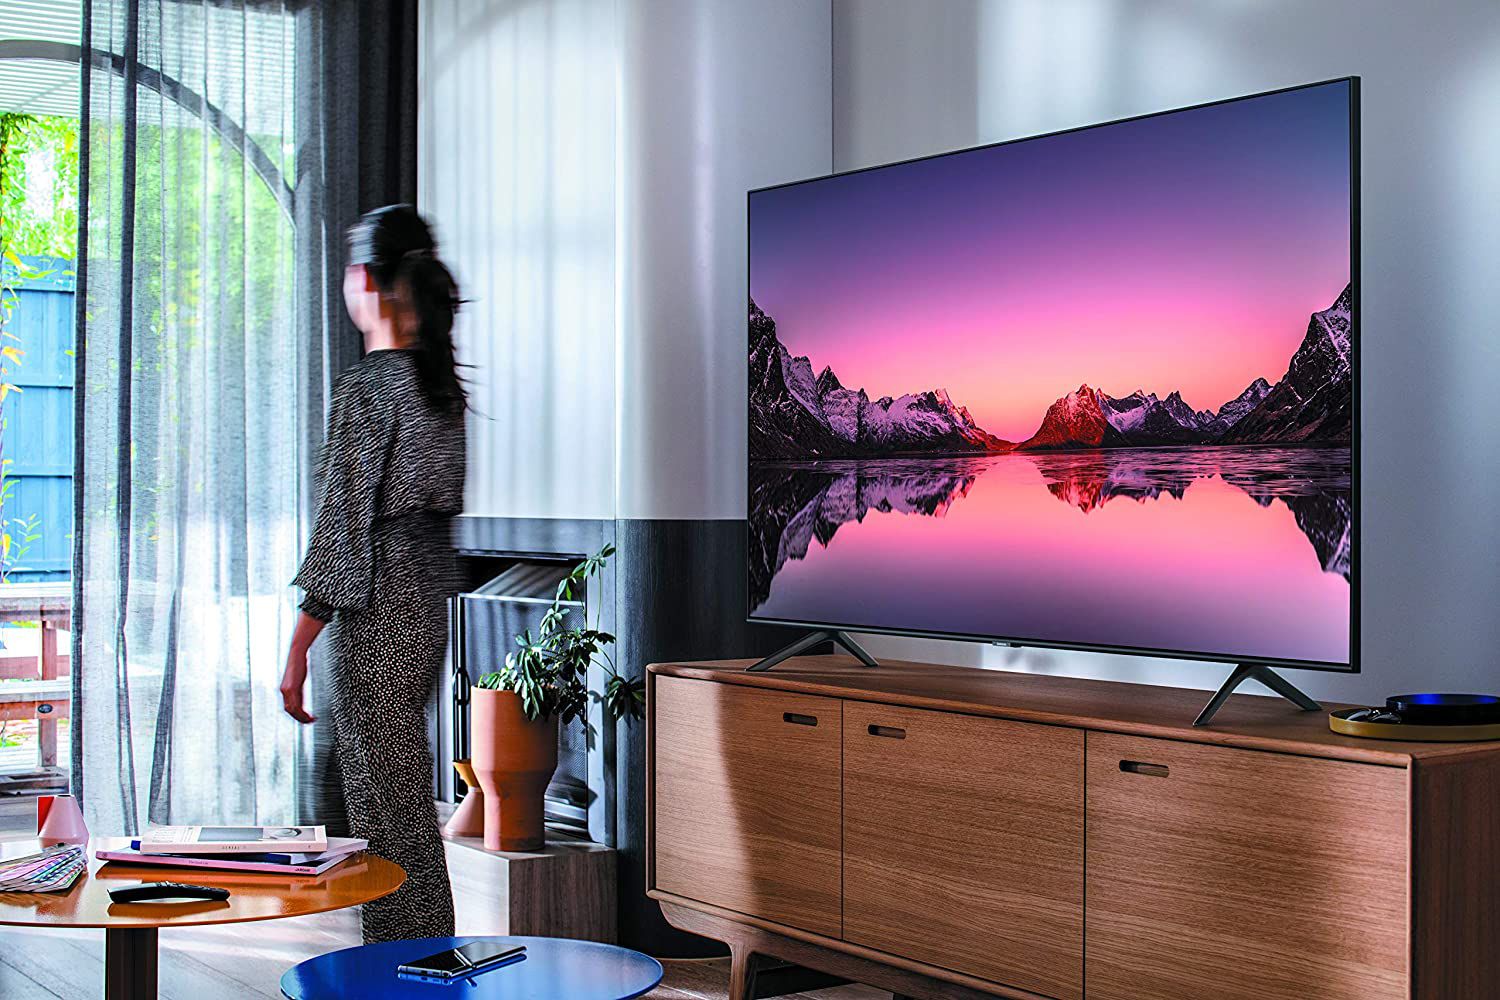 6 Best 75-Inch TVs for 2022 - Top-Selling 75-Inch TVs